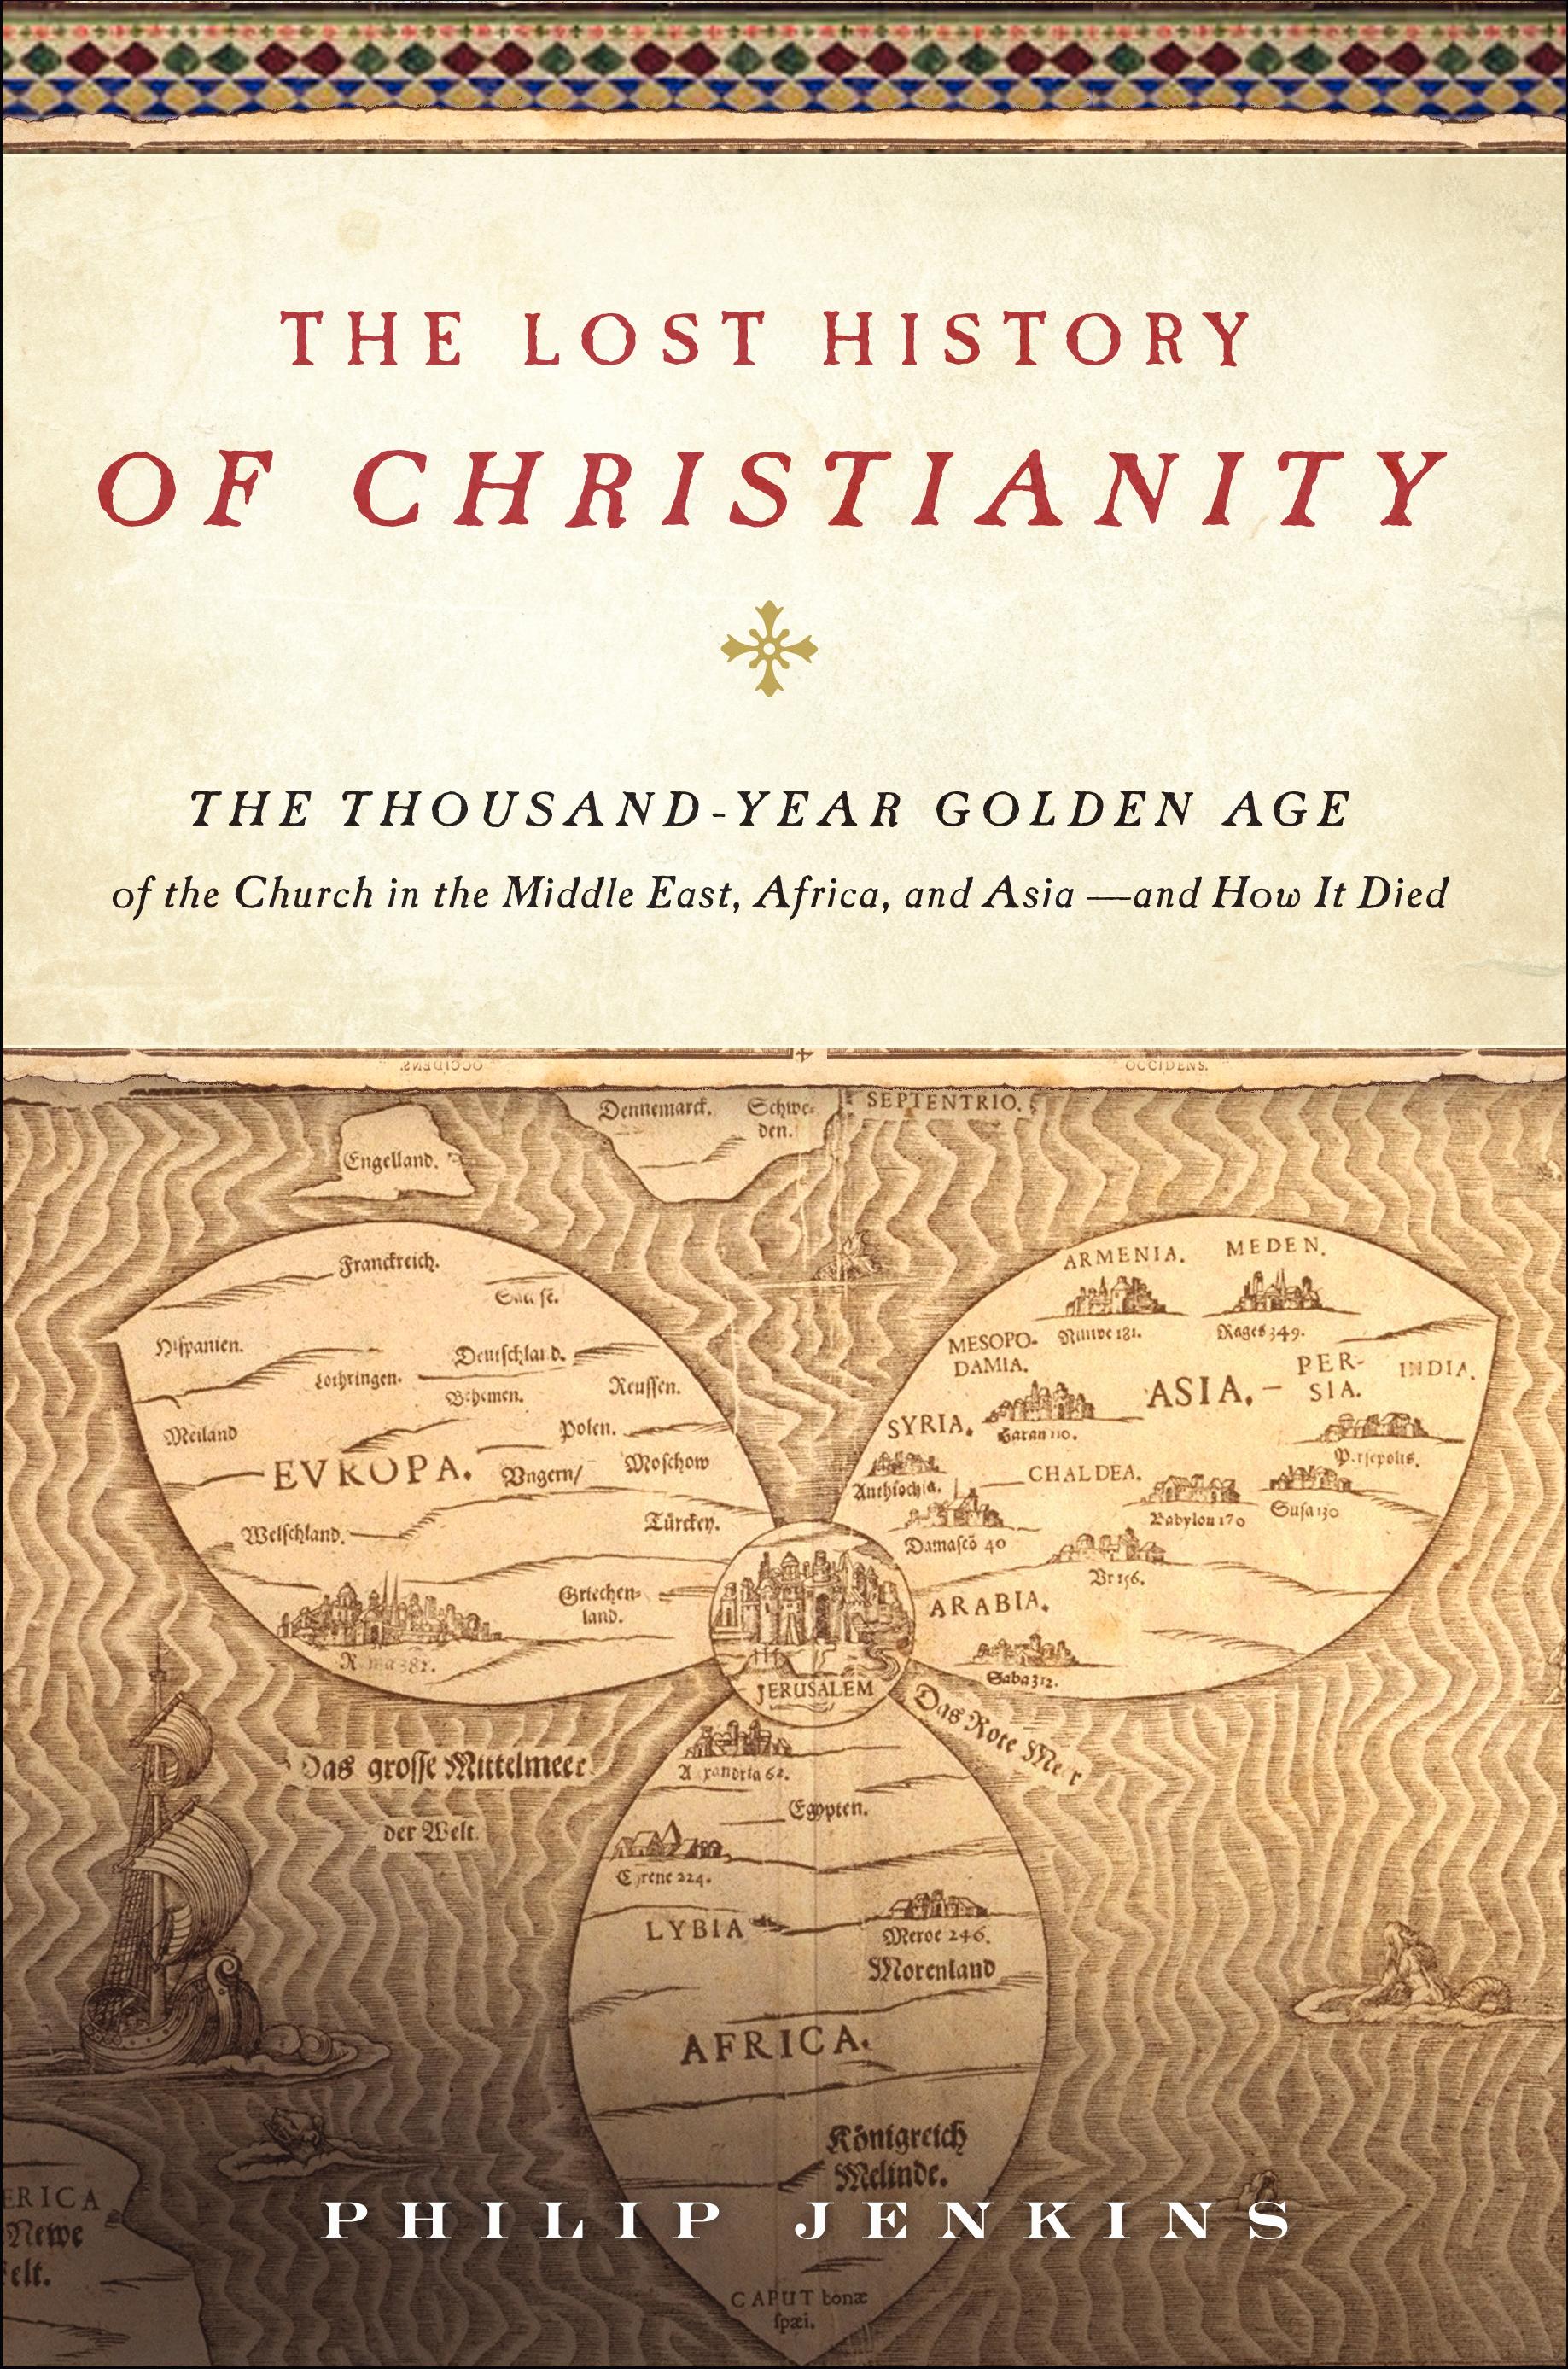 The Lost History of CHRISTIANITY